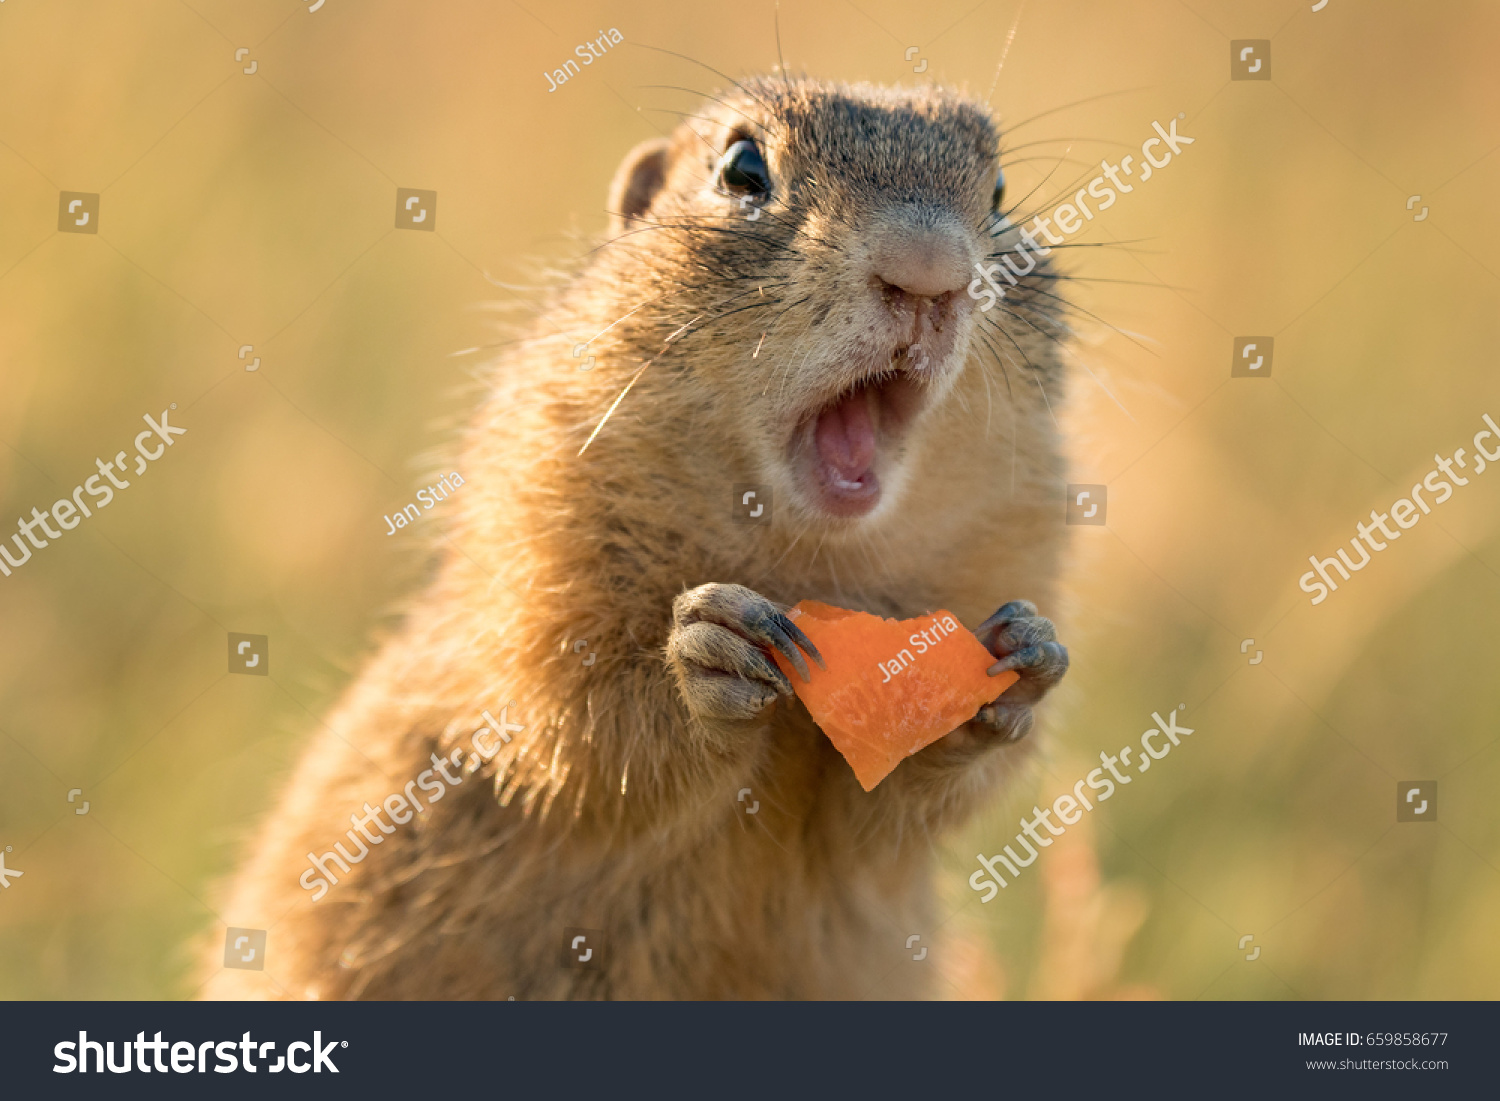 Small and lovely ground squirrel on a meadow among flowers during warm spring sunset. Very surprised, with its mouth opened. Peaceful, relaxing, amazing and funny
 #659858677